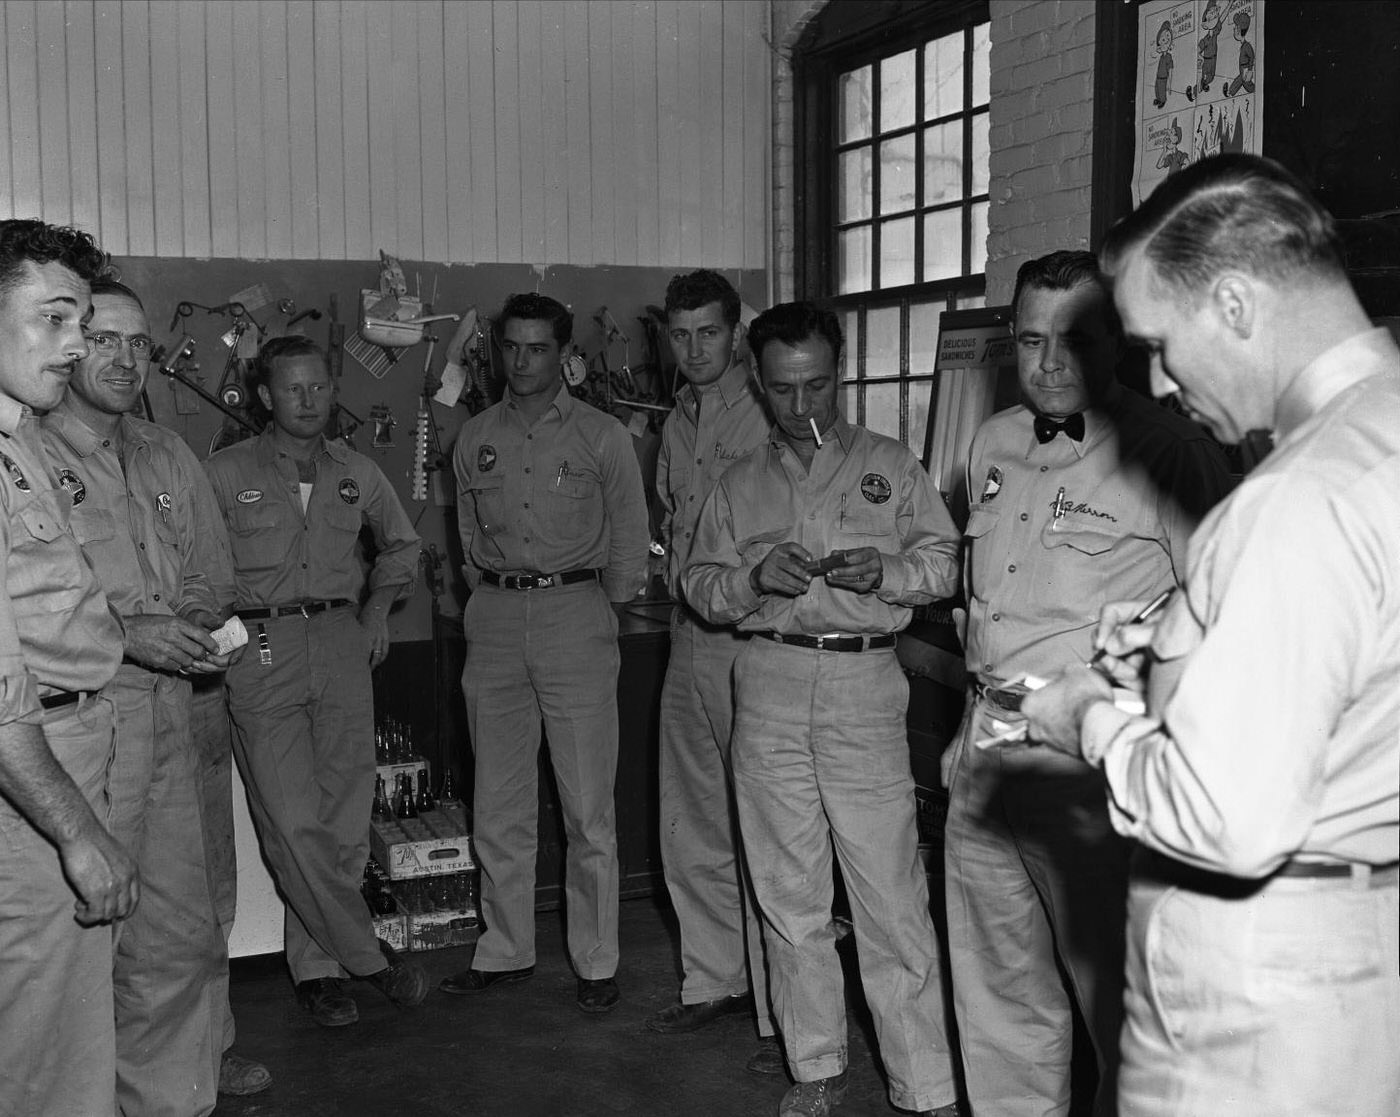 Group of Service Men, 1955.